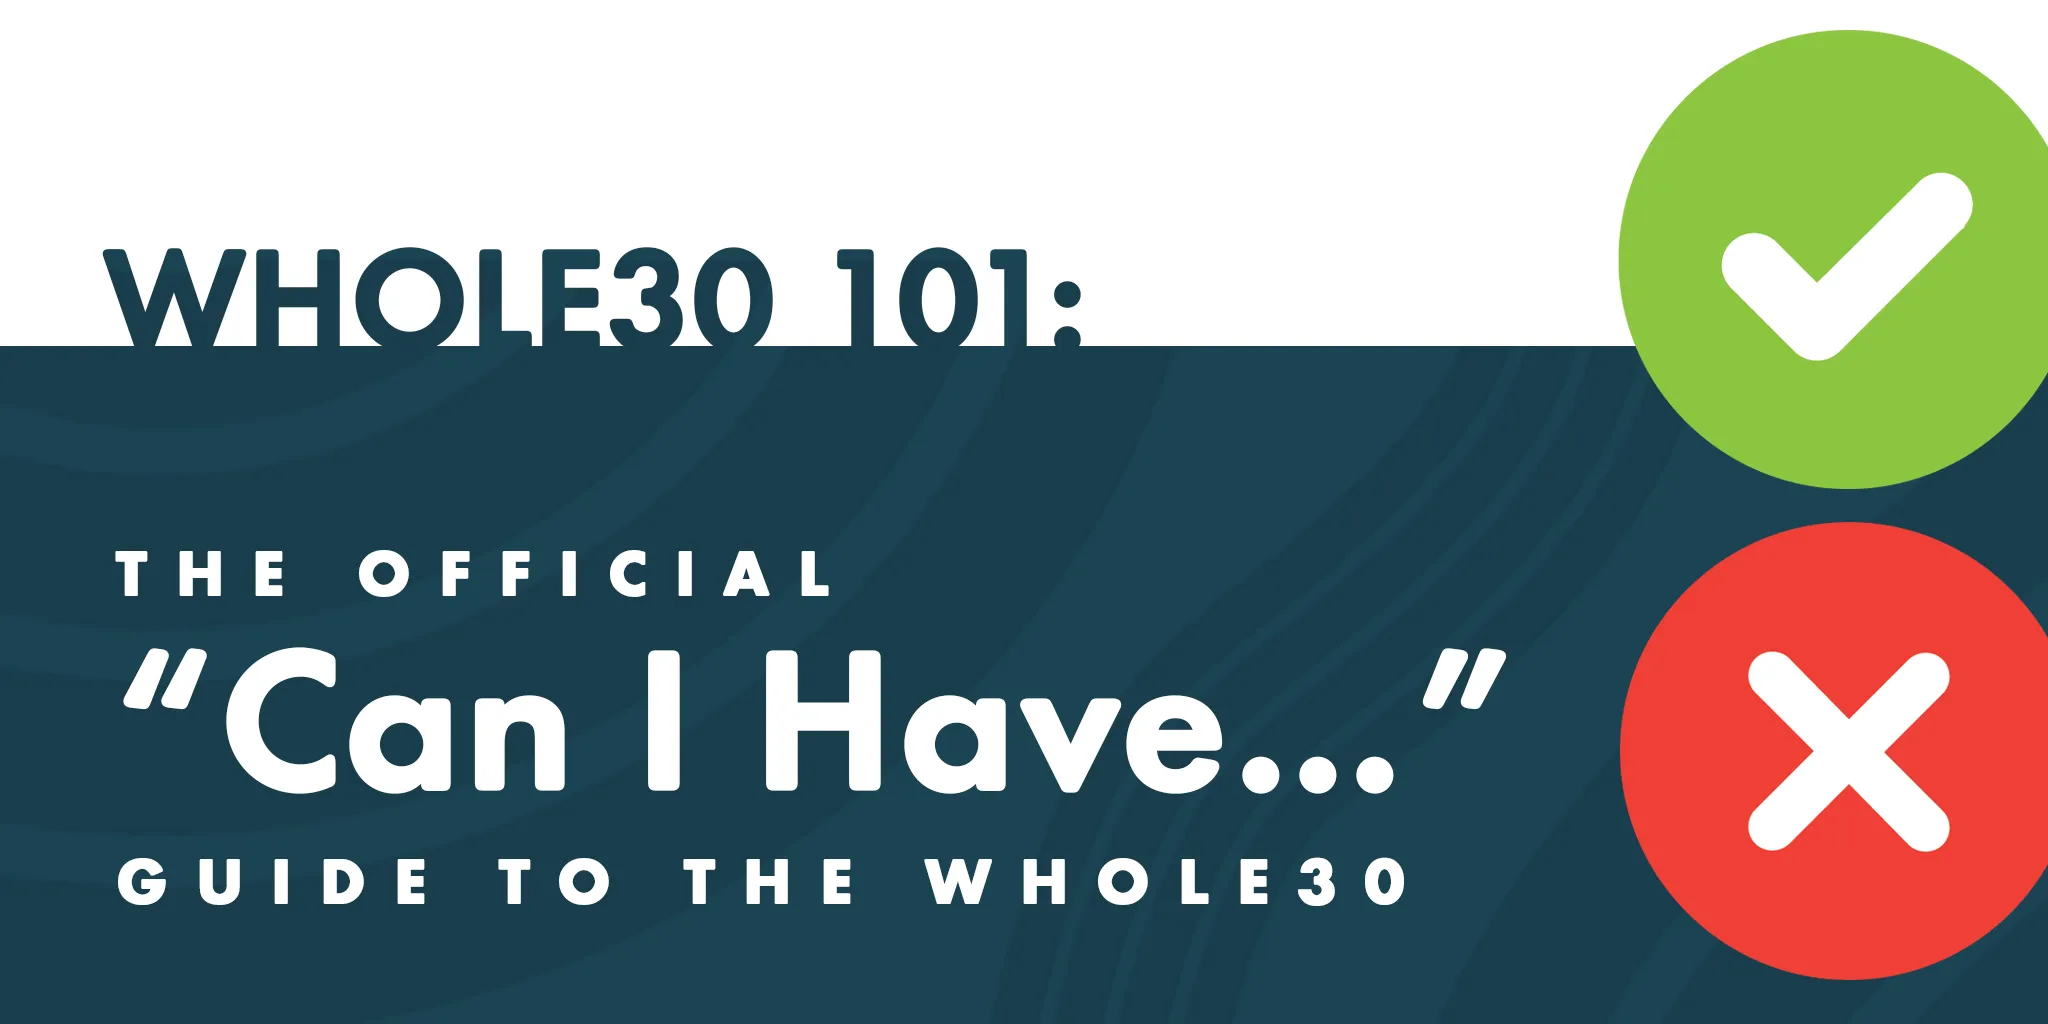 Whole30 101: The Official “Can I Have…” Guide to the Whole30